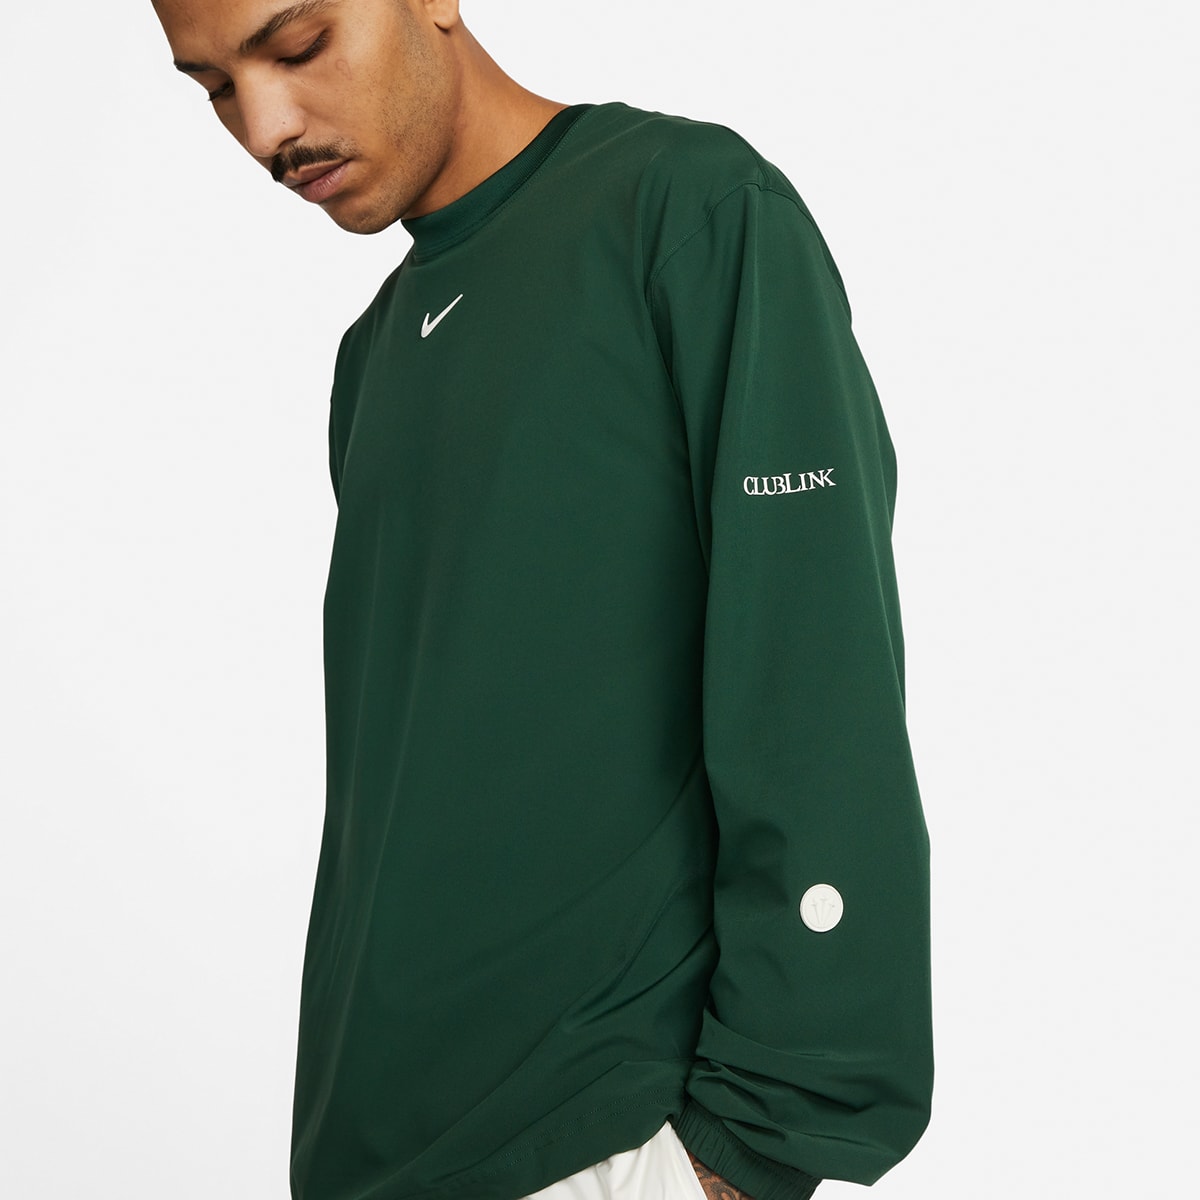 Nike x NOCTA Long Sleeve Woven Crew (Pro Green & Black) | END. Launches